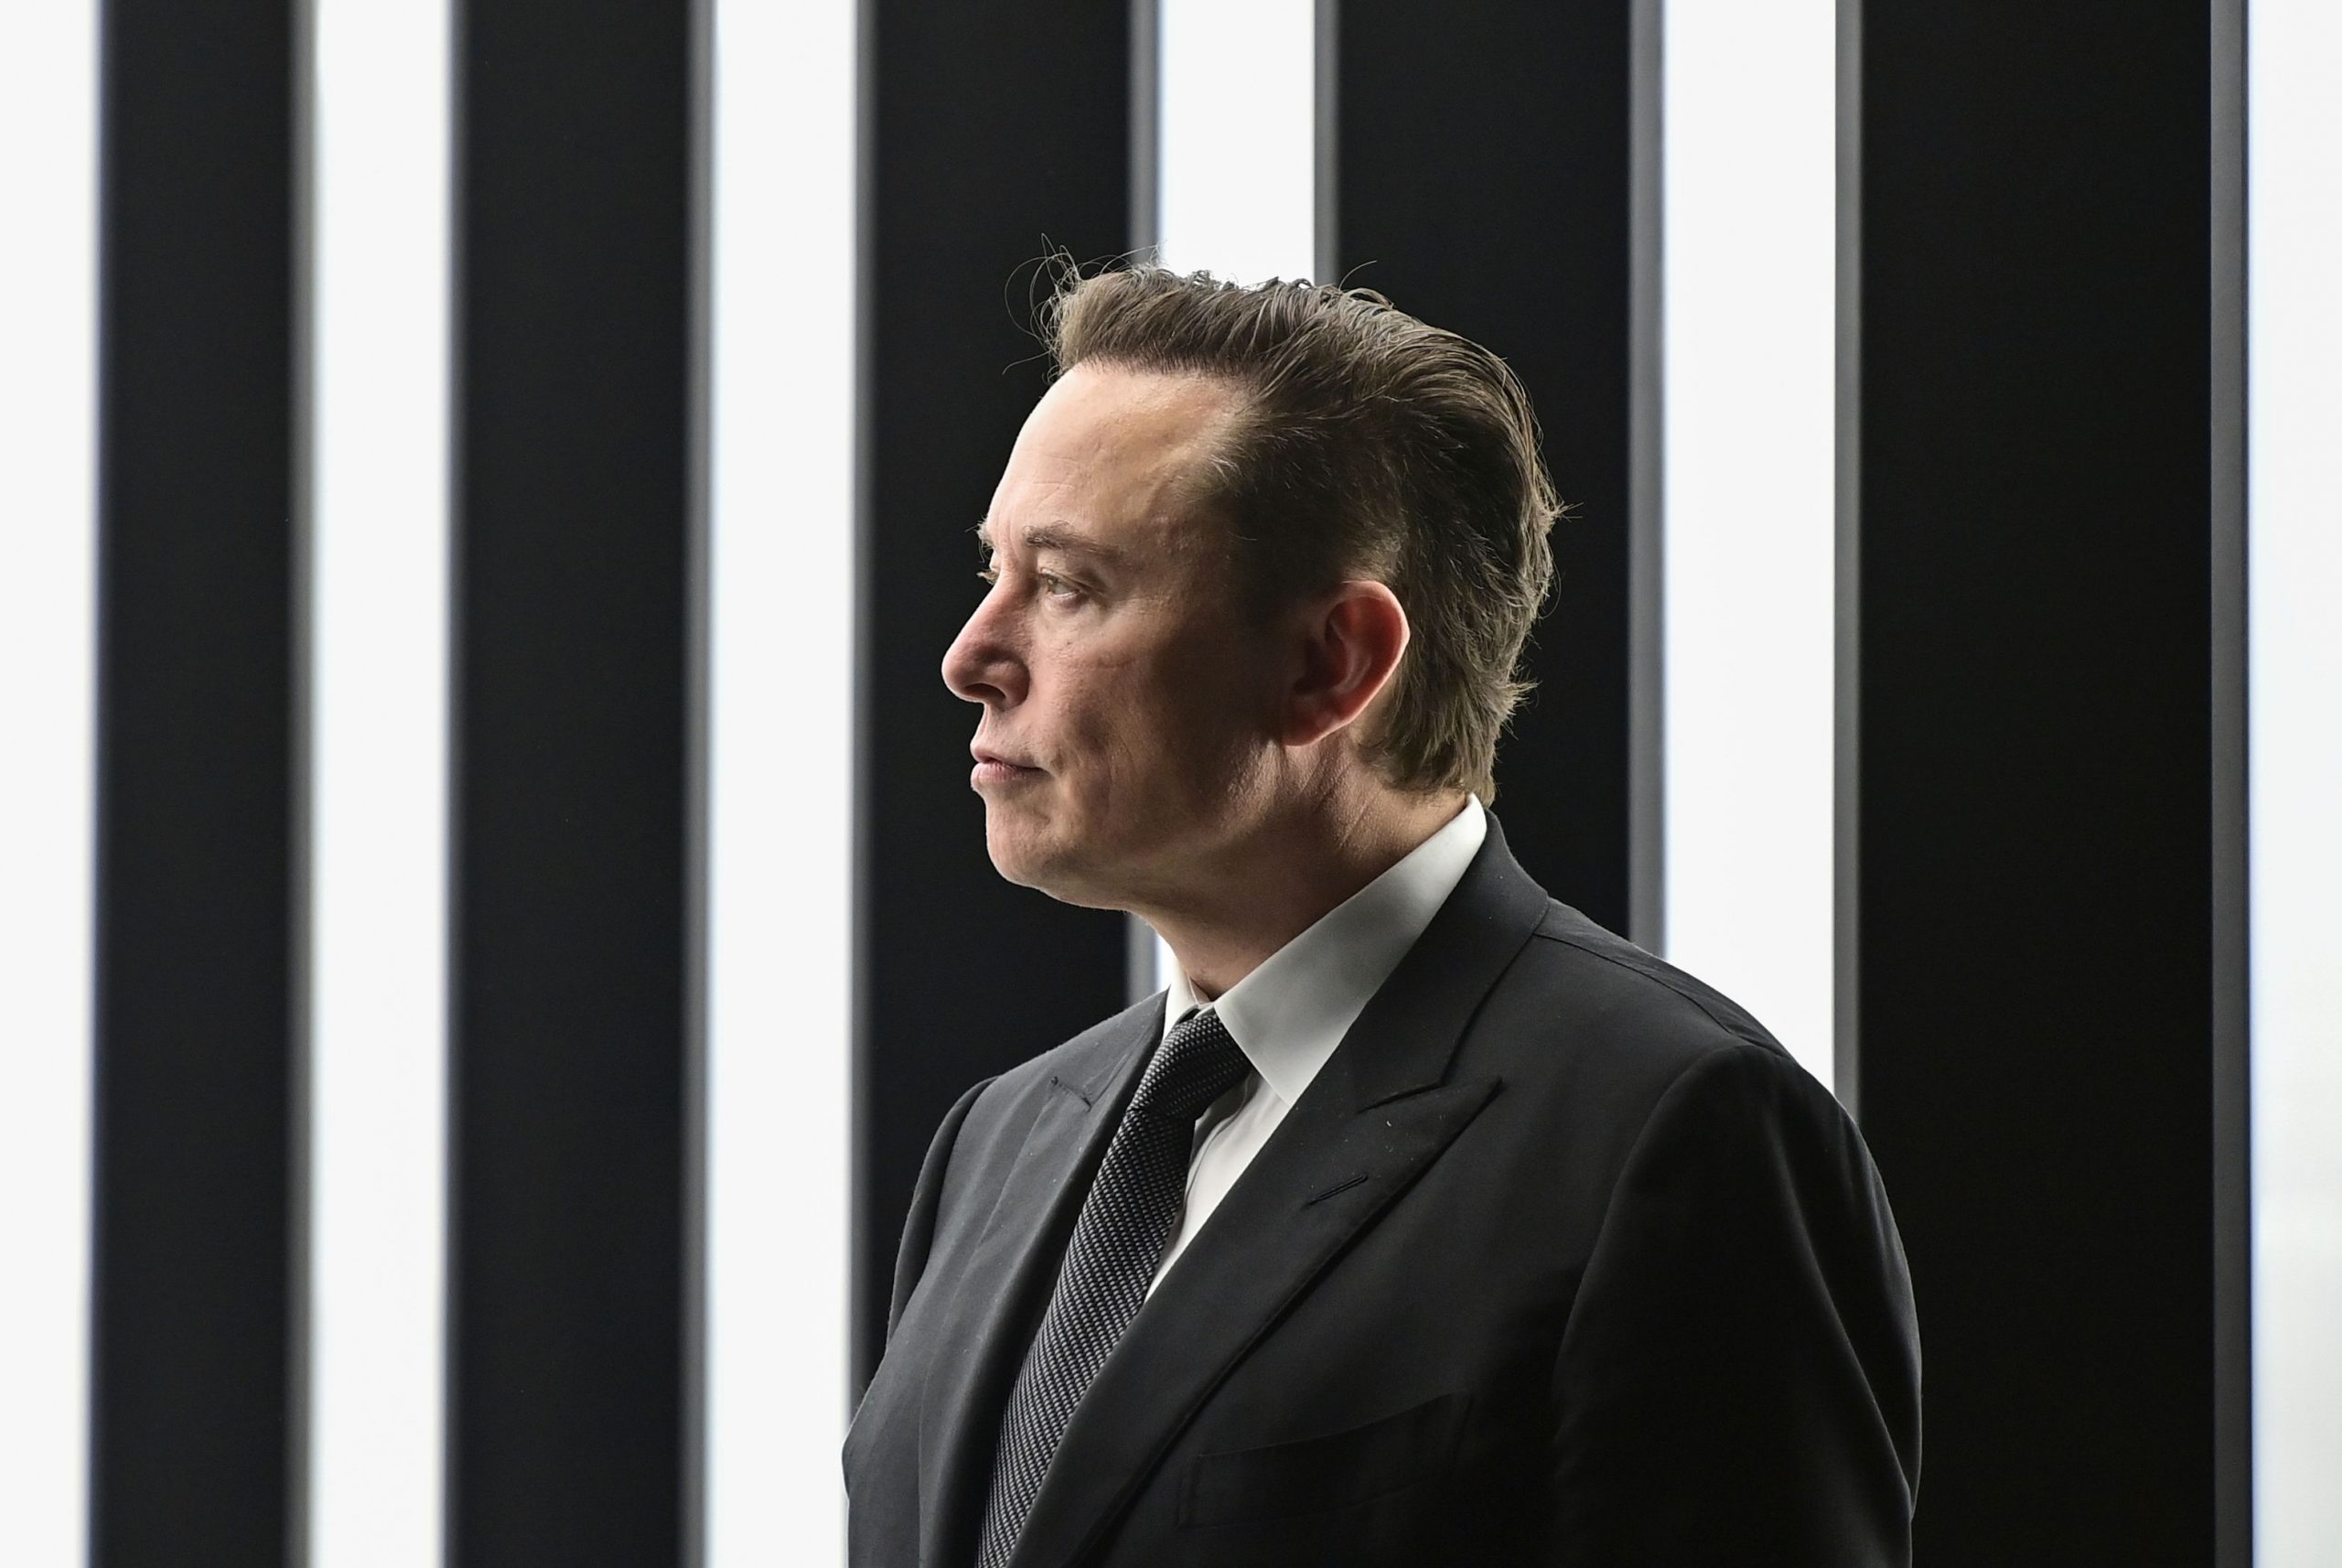 Elon Musk’s Burnt Hair scent: All you need to know